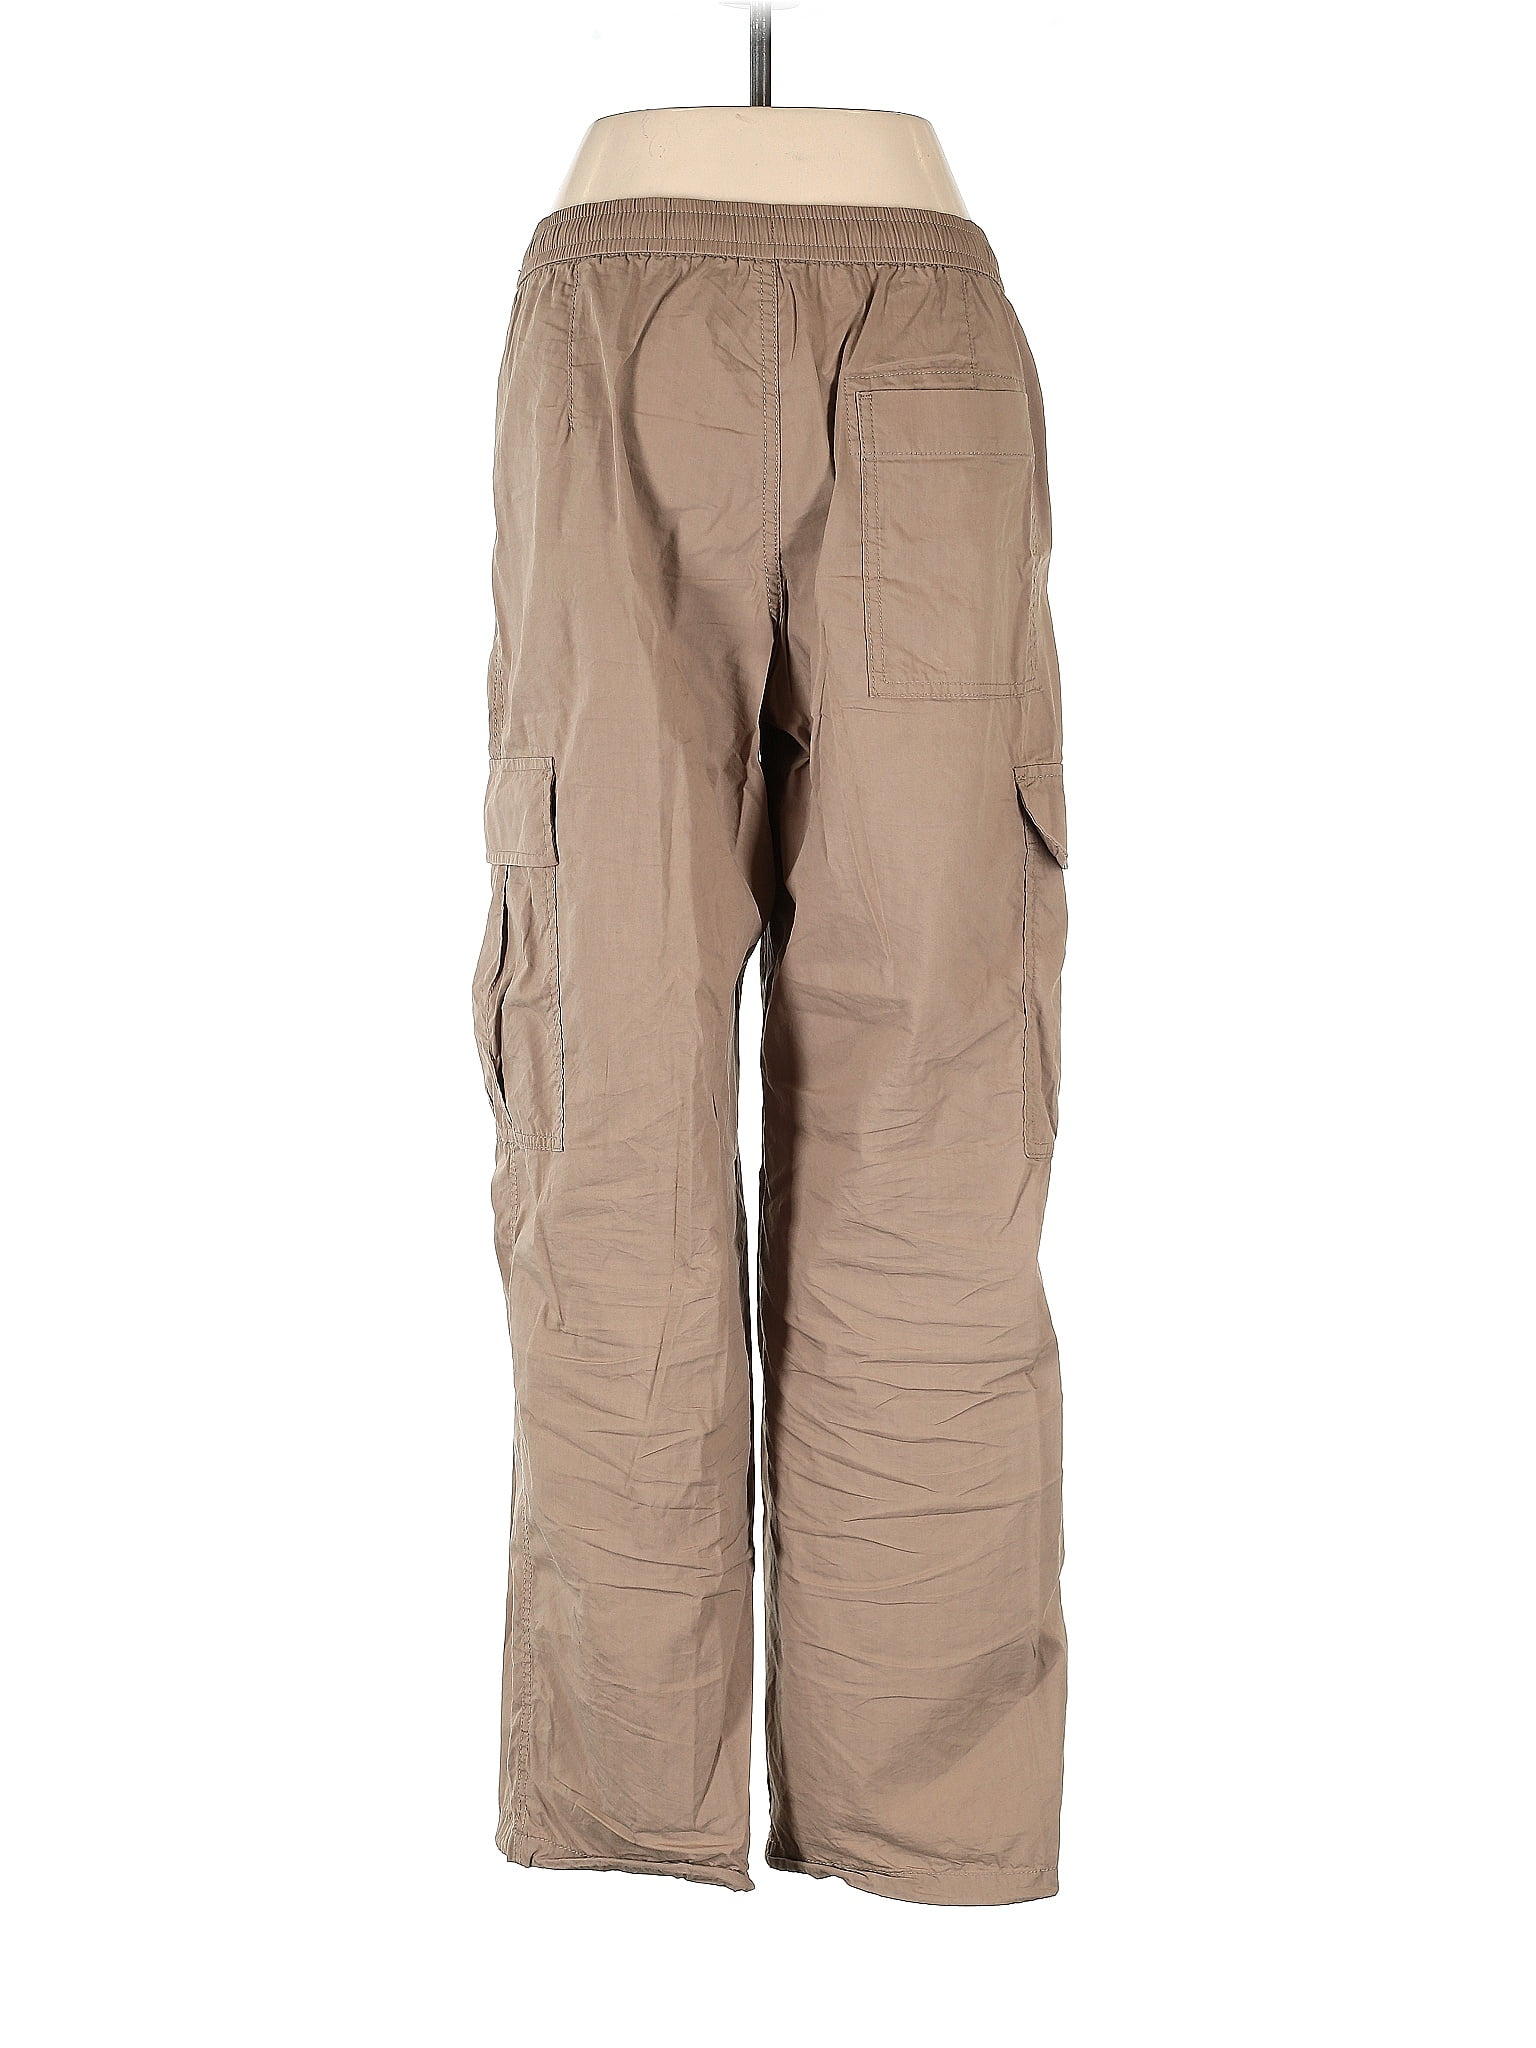 Uniqlo Women's Cargo Pants On Sale Up To 90% Off Retail